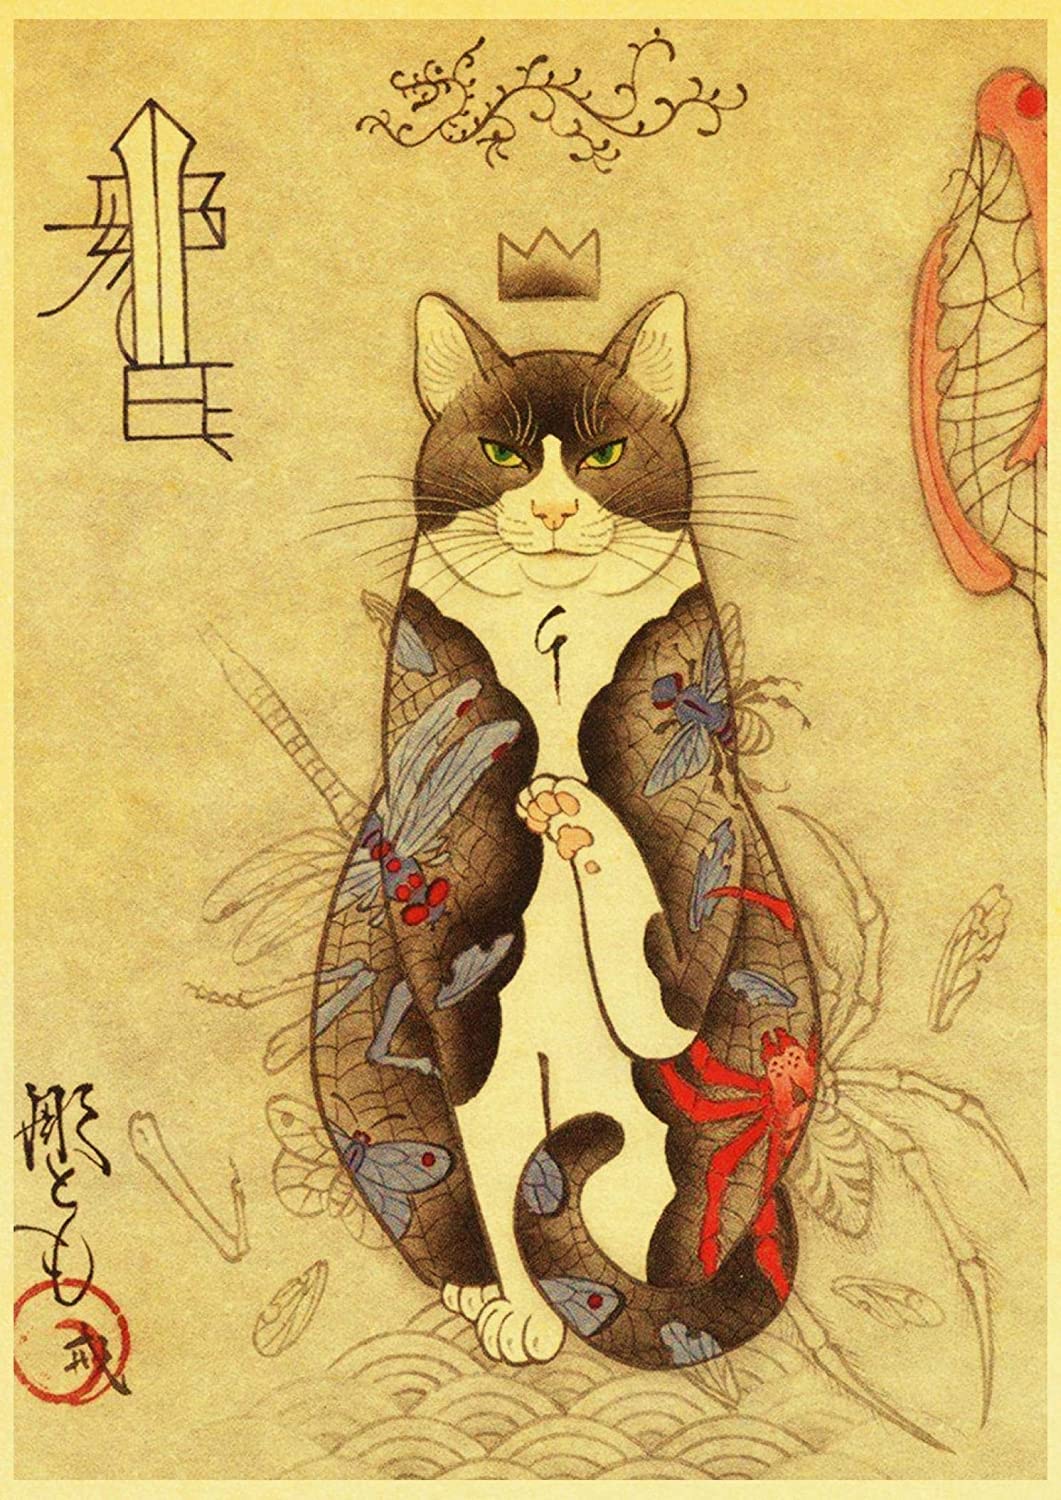 Aishangjia Vintage Japanese Samurai Cat Tattoo Cat Retro Poster Craft Painting For Home Decor Wall Stickers Wallpaper 50x70 Cm(19.68x27.55 In) AD 1910, Amazon.co.uk: Home & Kitchen